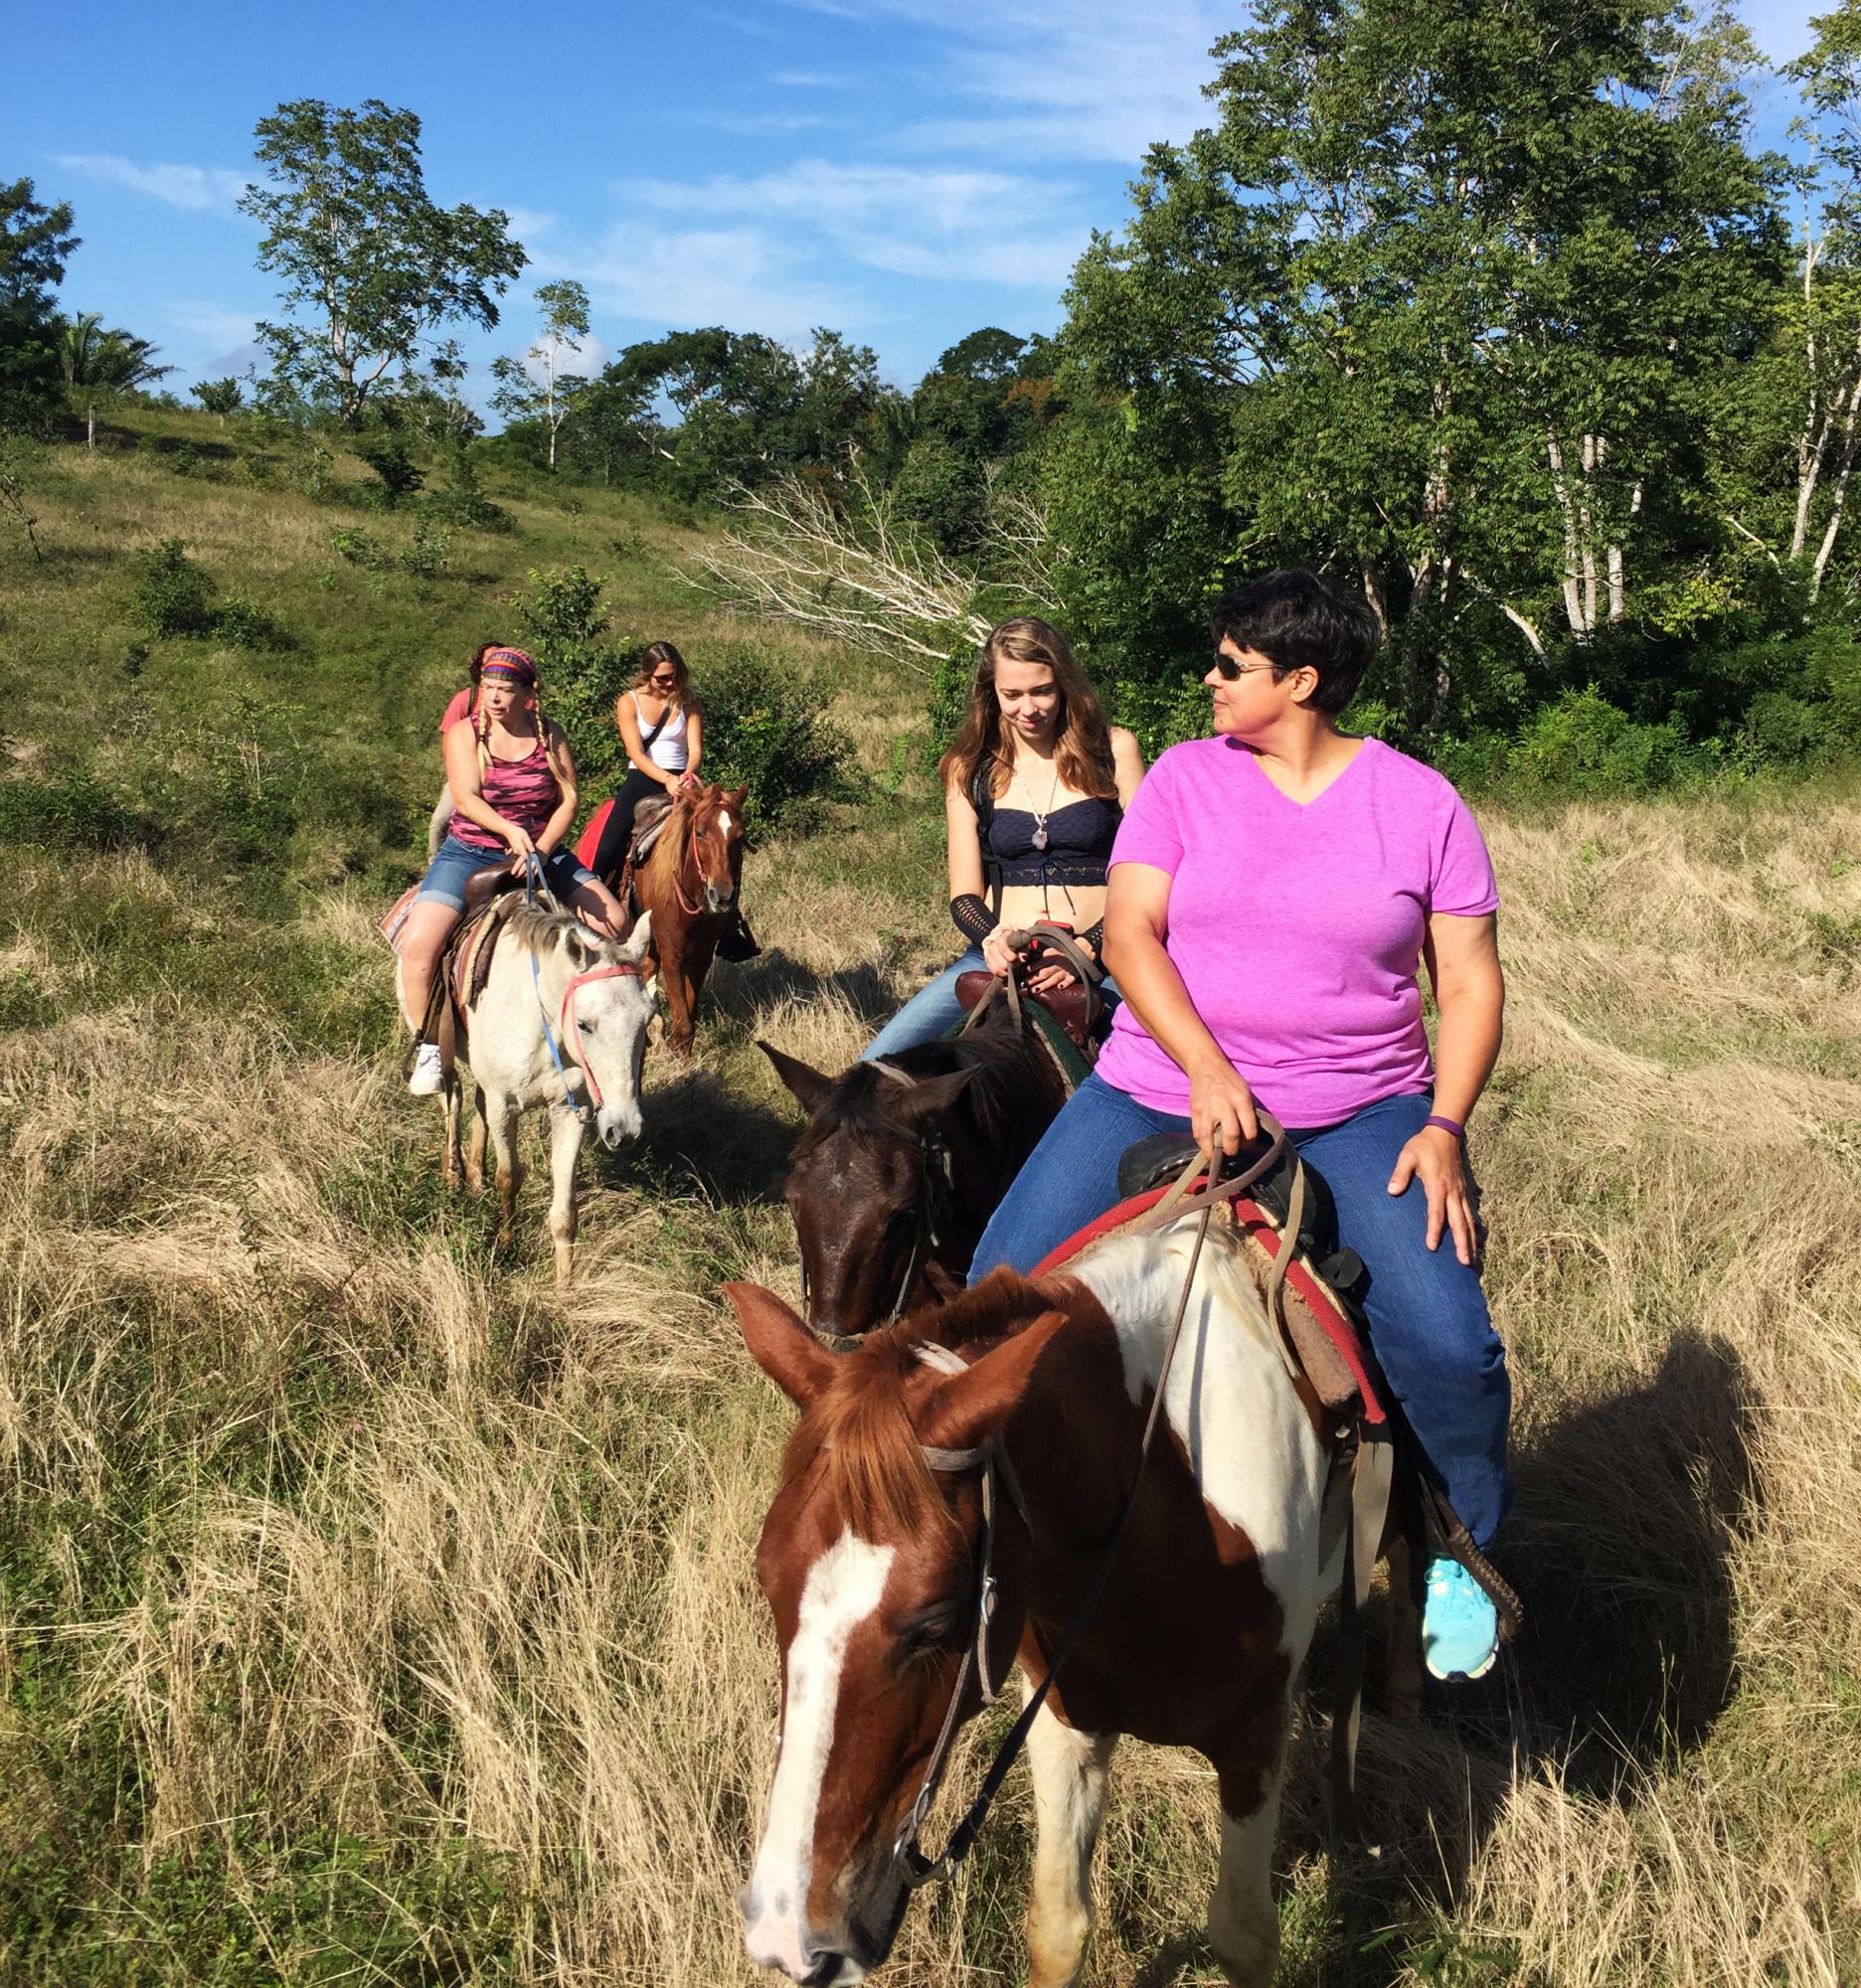 Horseback riding tour available daily.